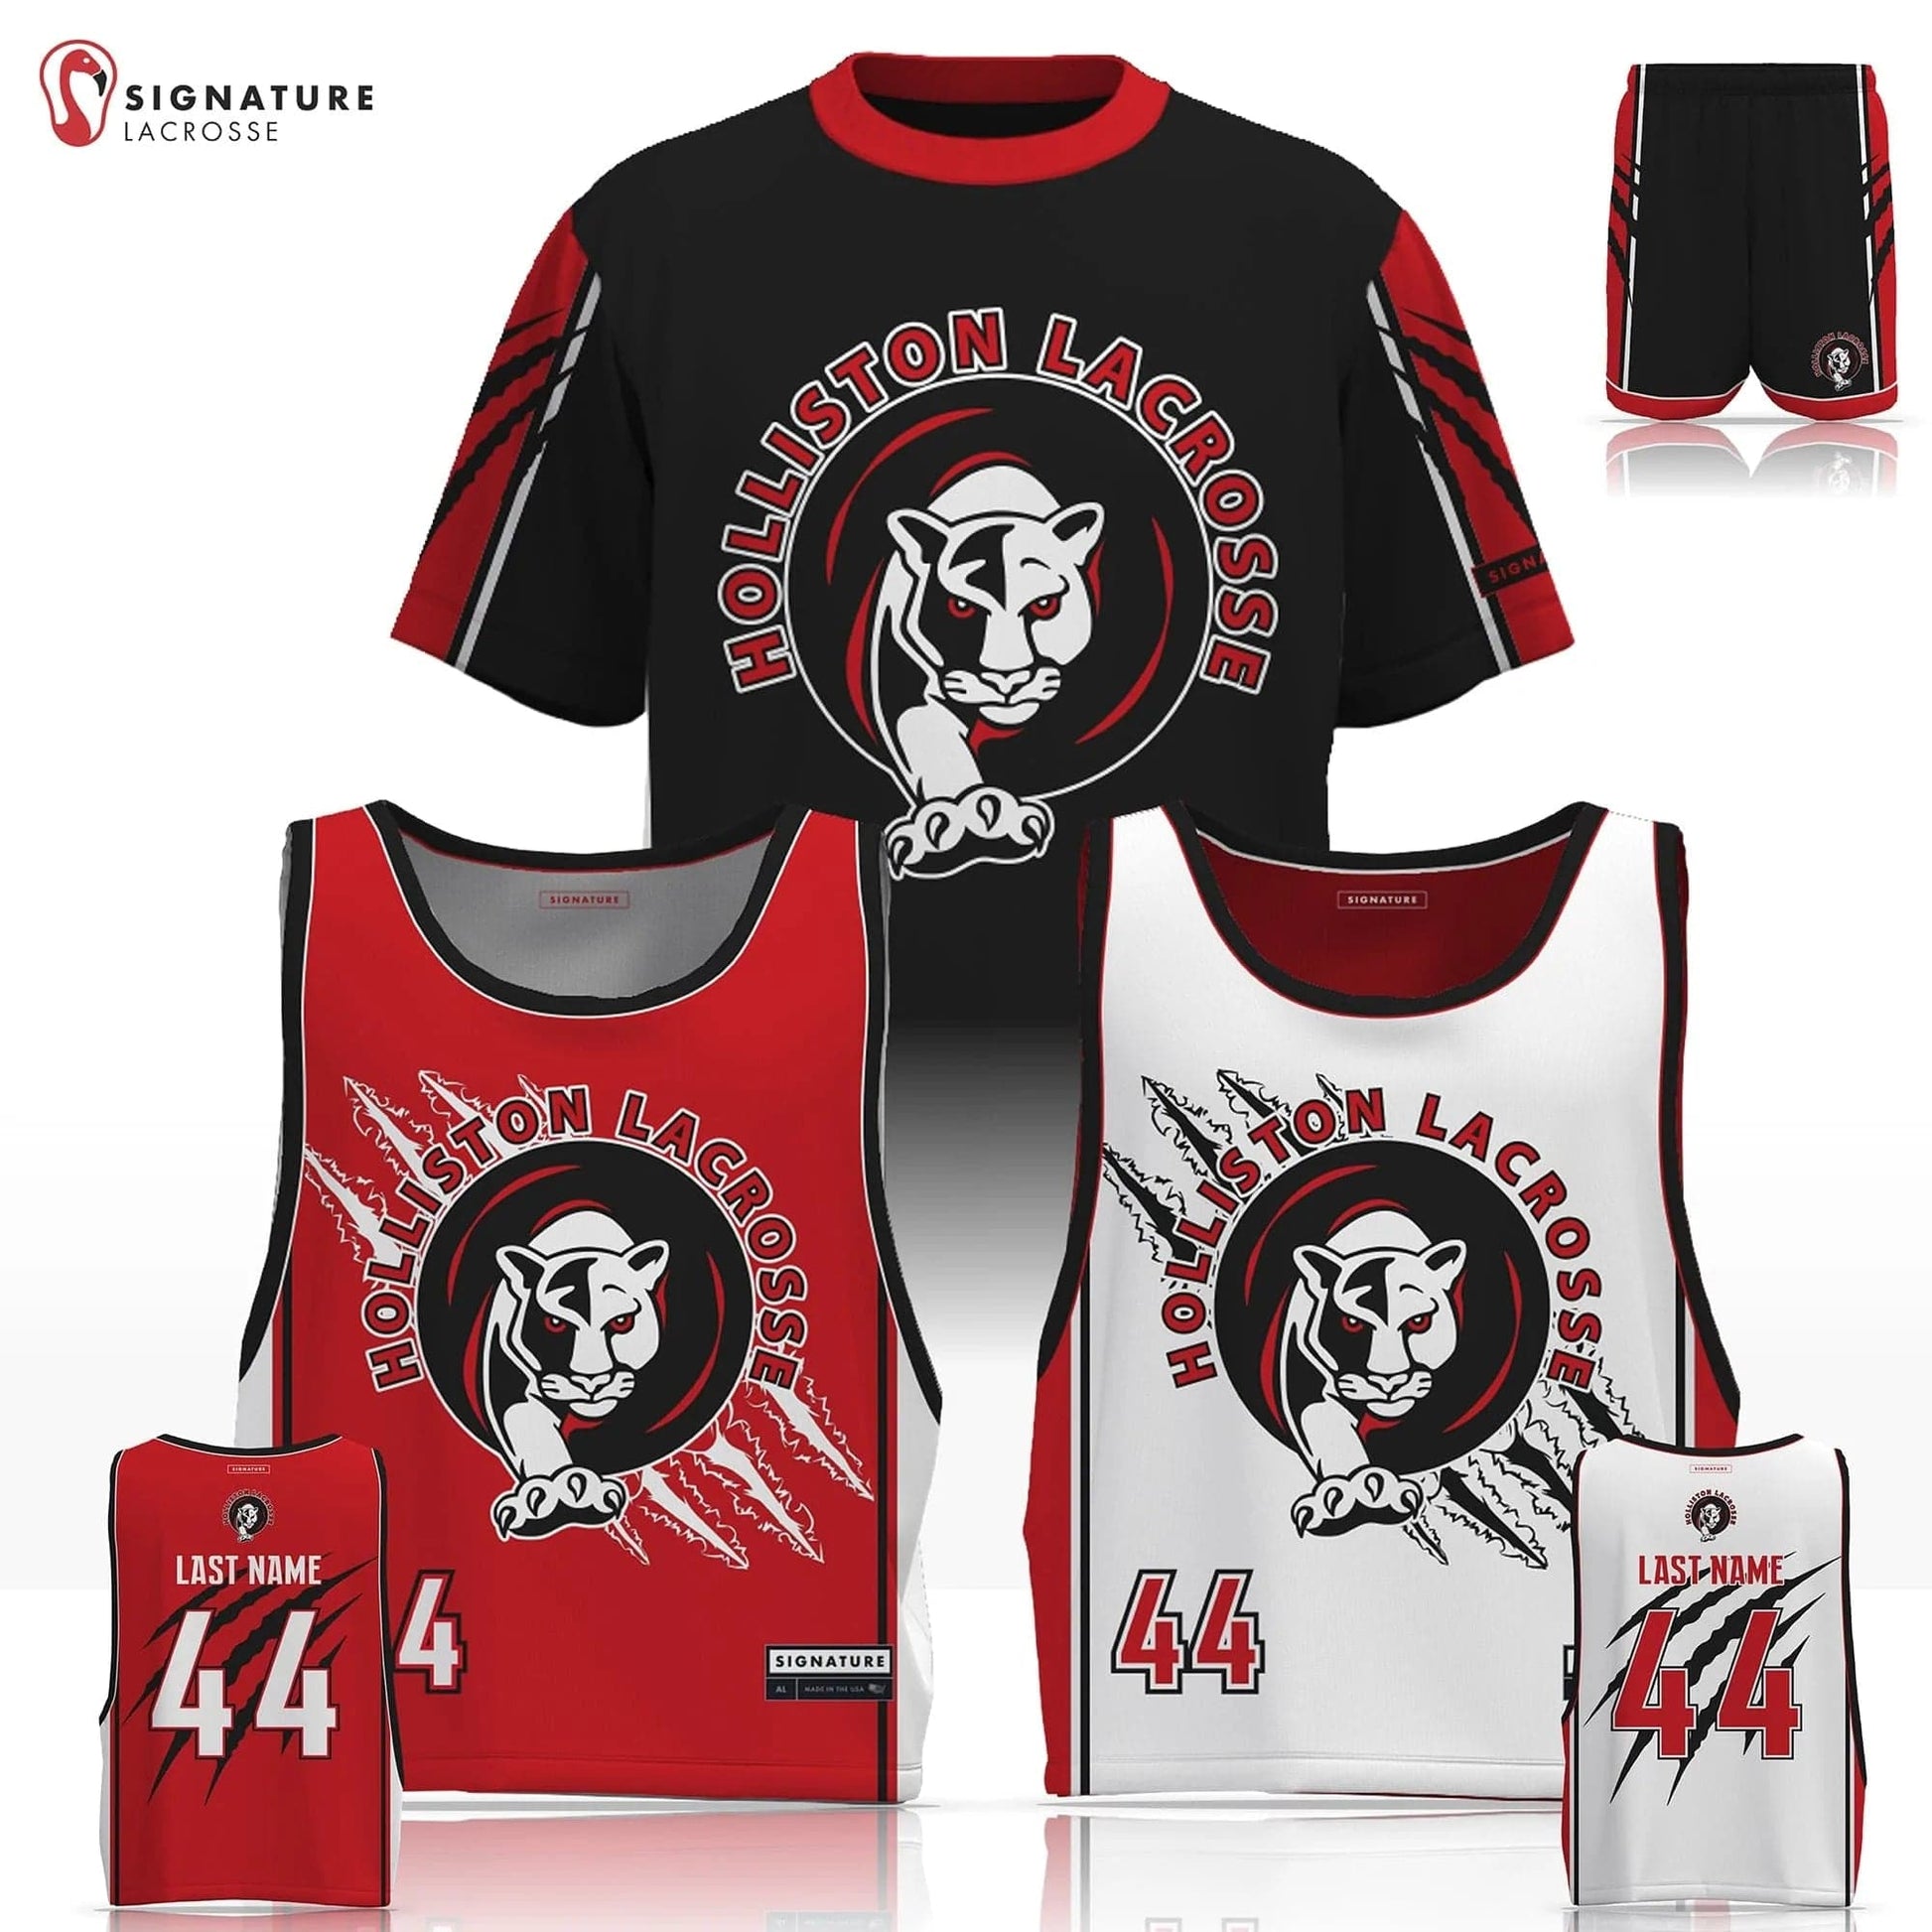 Holliston Youth Lacrosse Men's 3 Piece Player Game Package: Grade 3 & 4 Signature Lacrosse